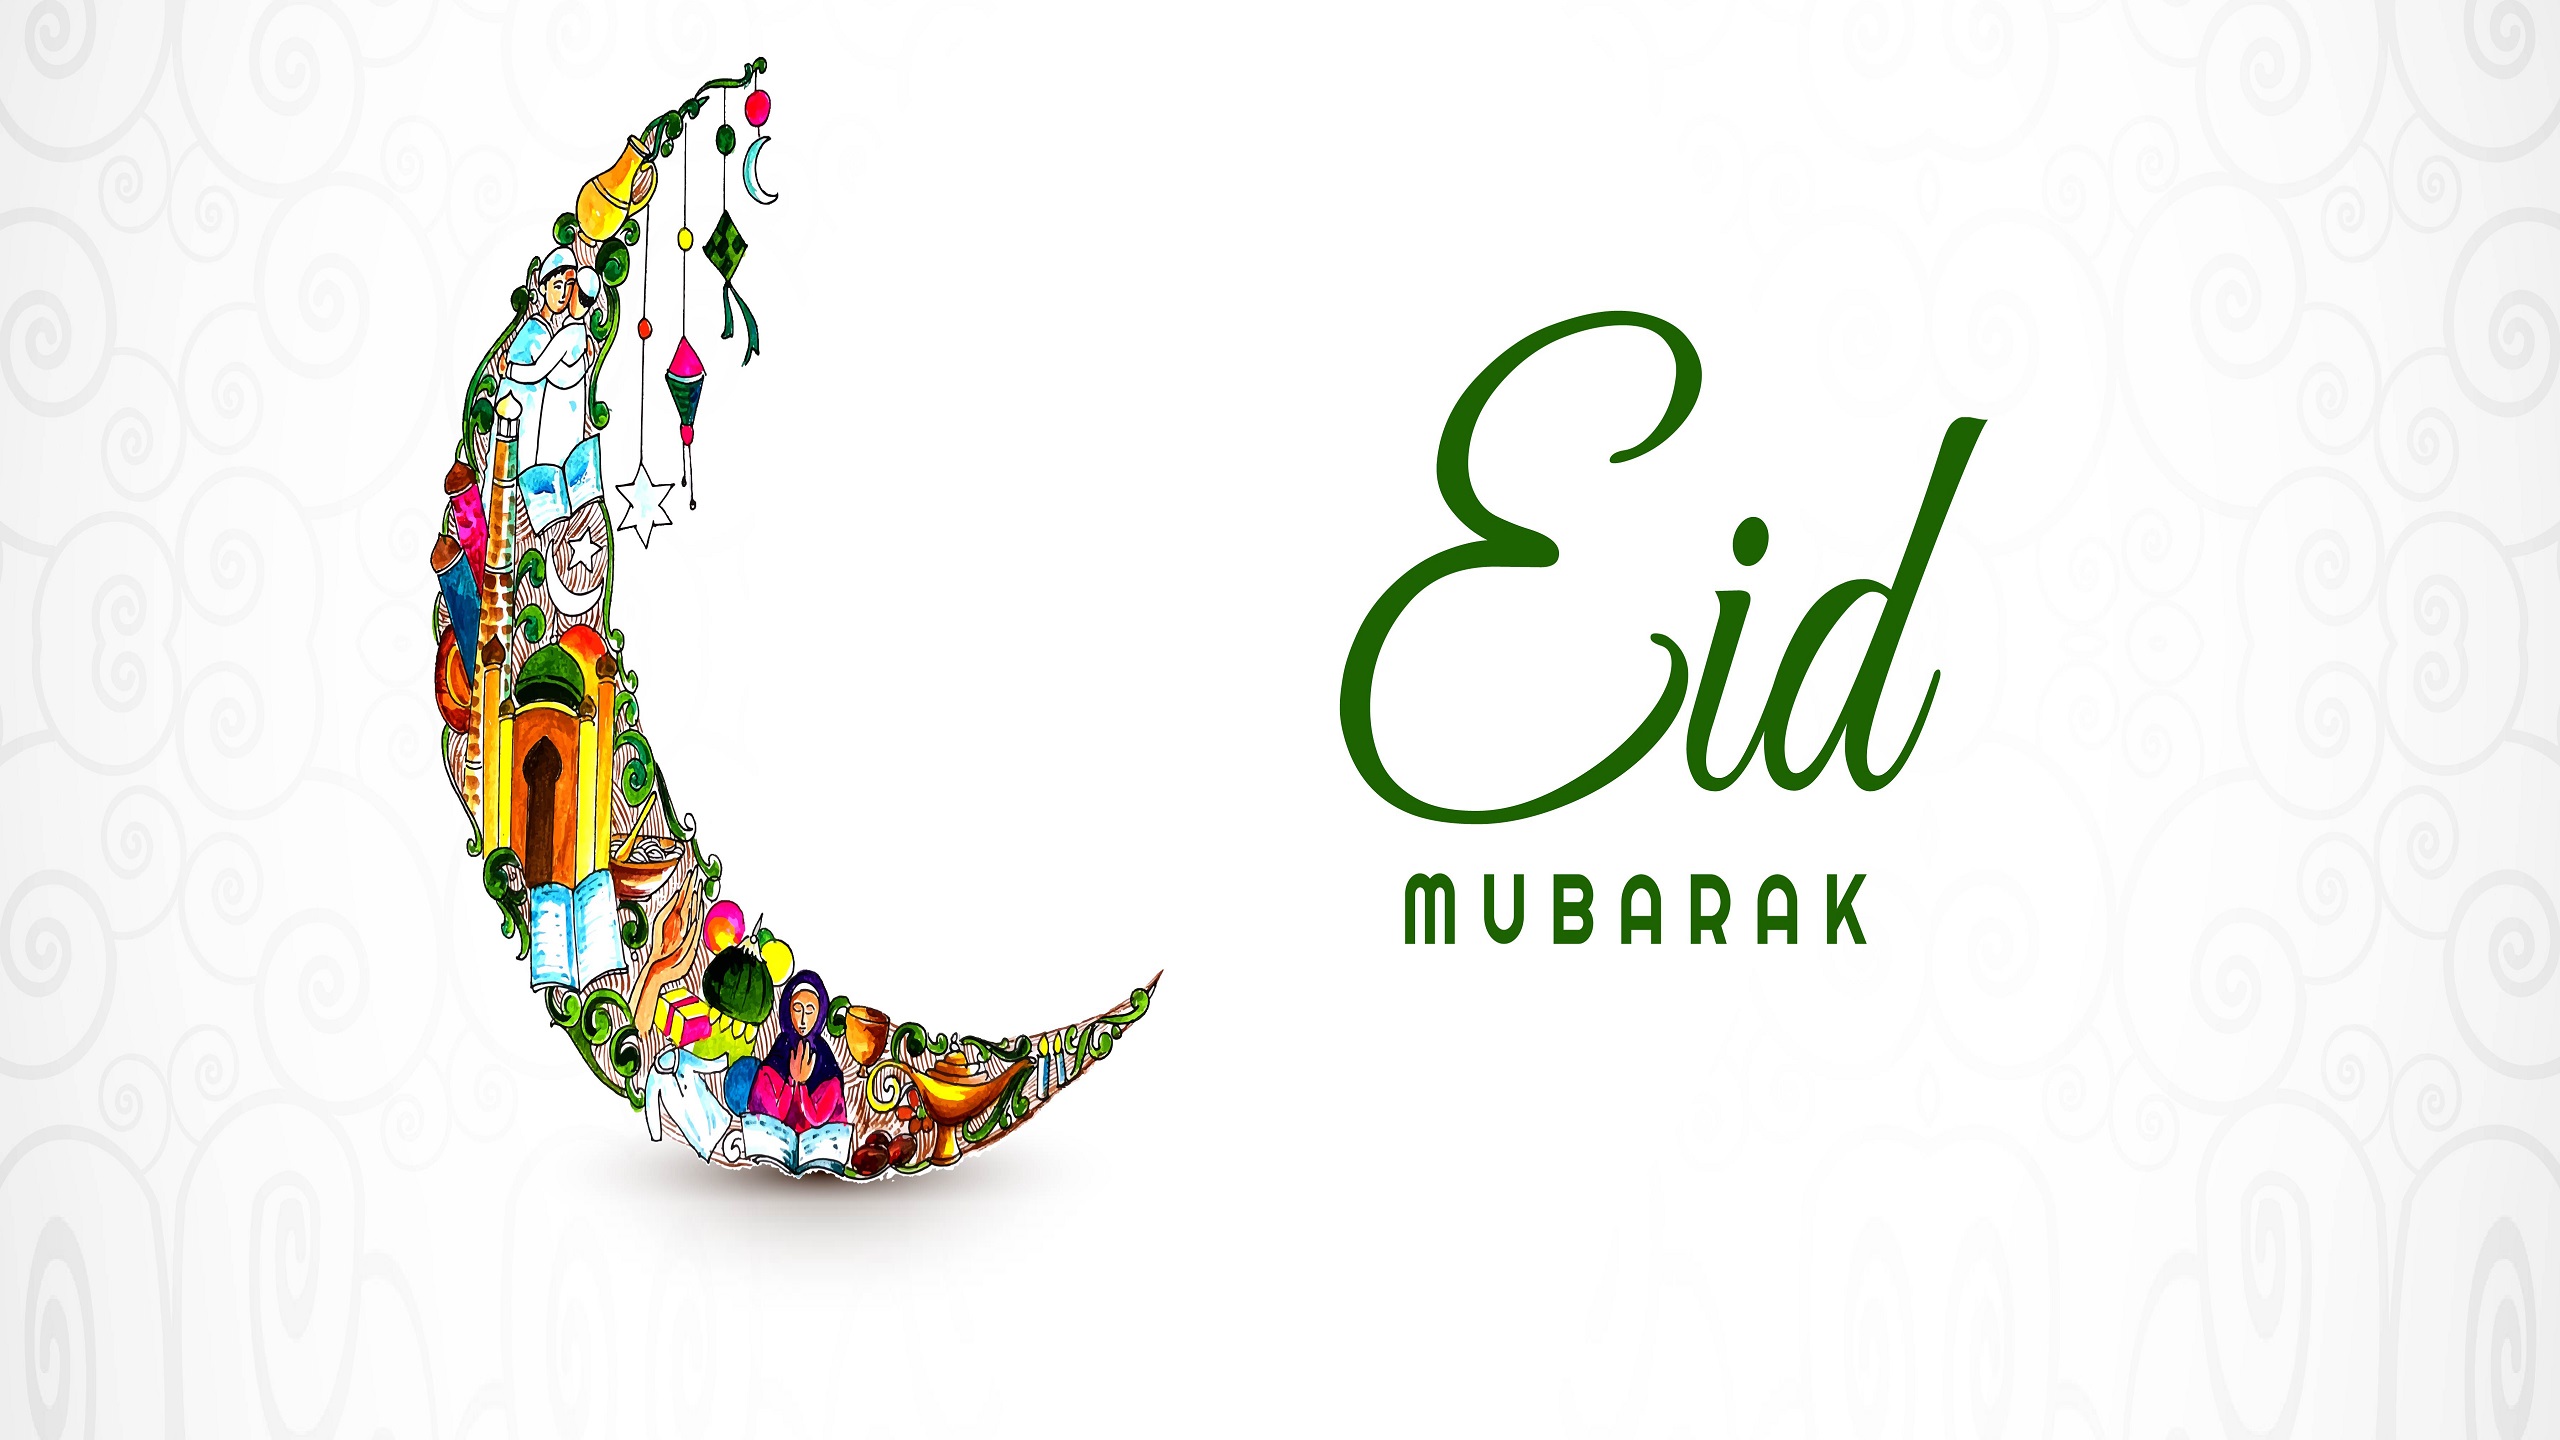 Wishing Our Readers a Blessed Eid: A Message of Unity and Understanding